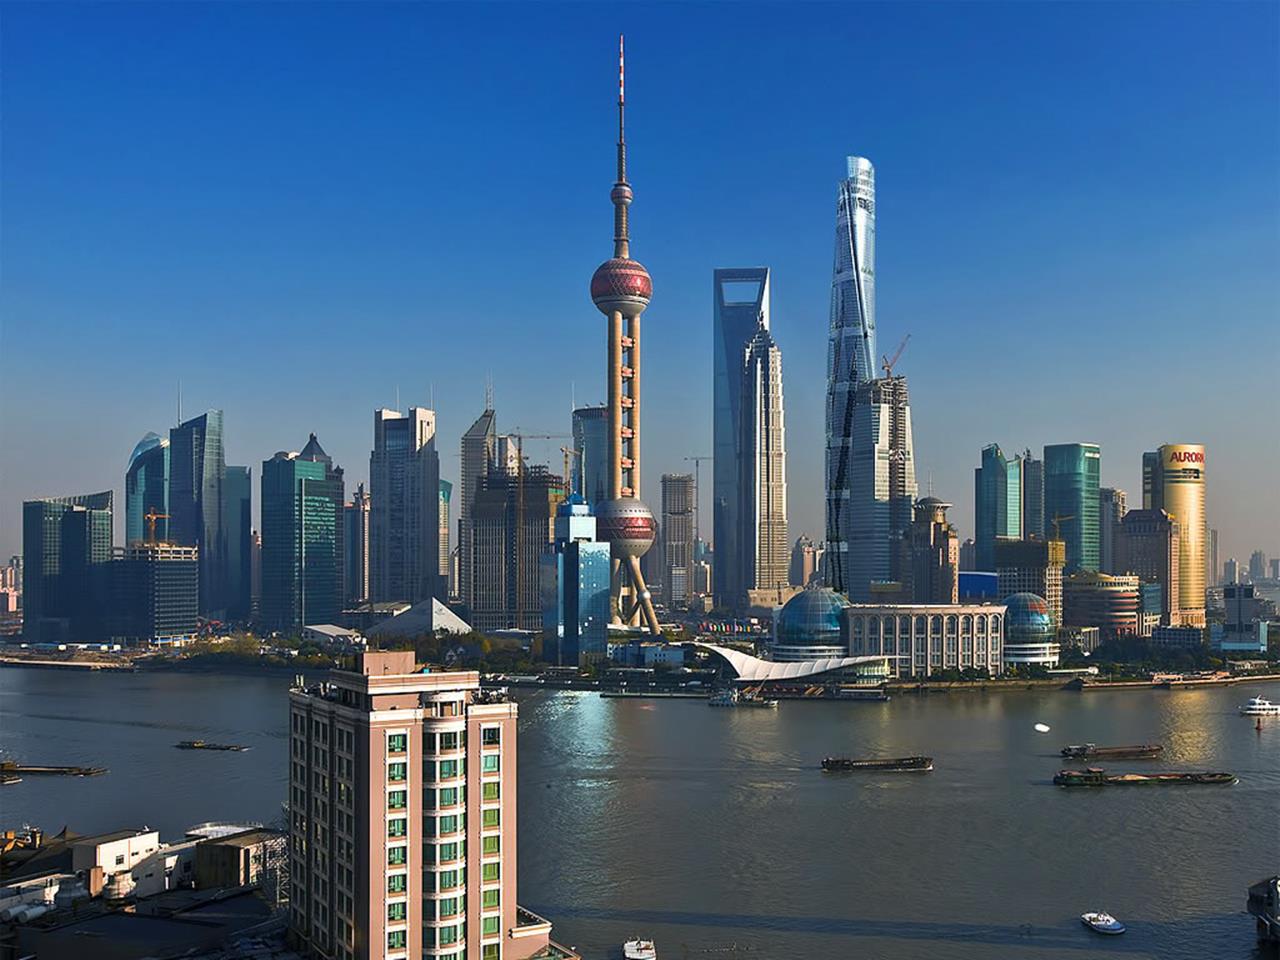 Tour To Awesome Shanghai Tower Megatall China